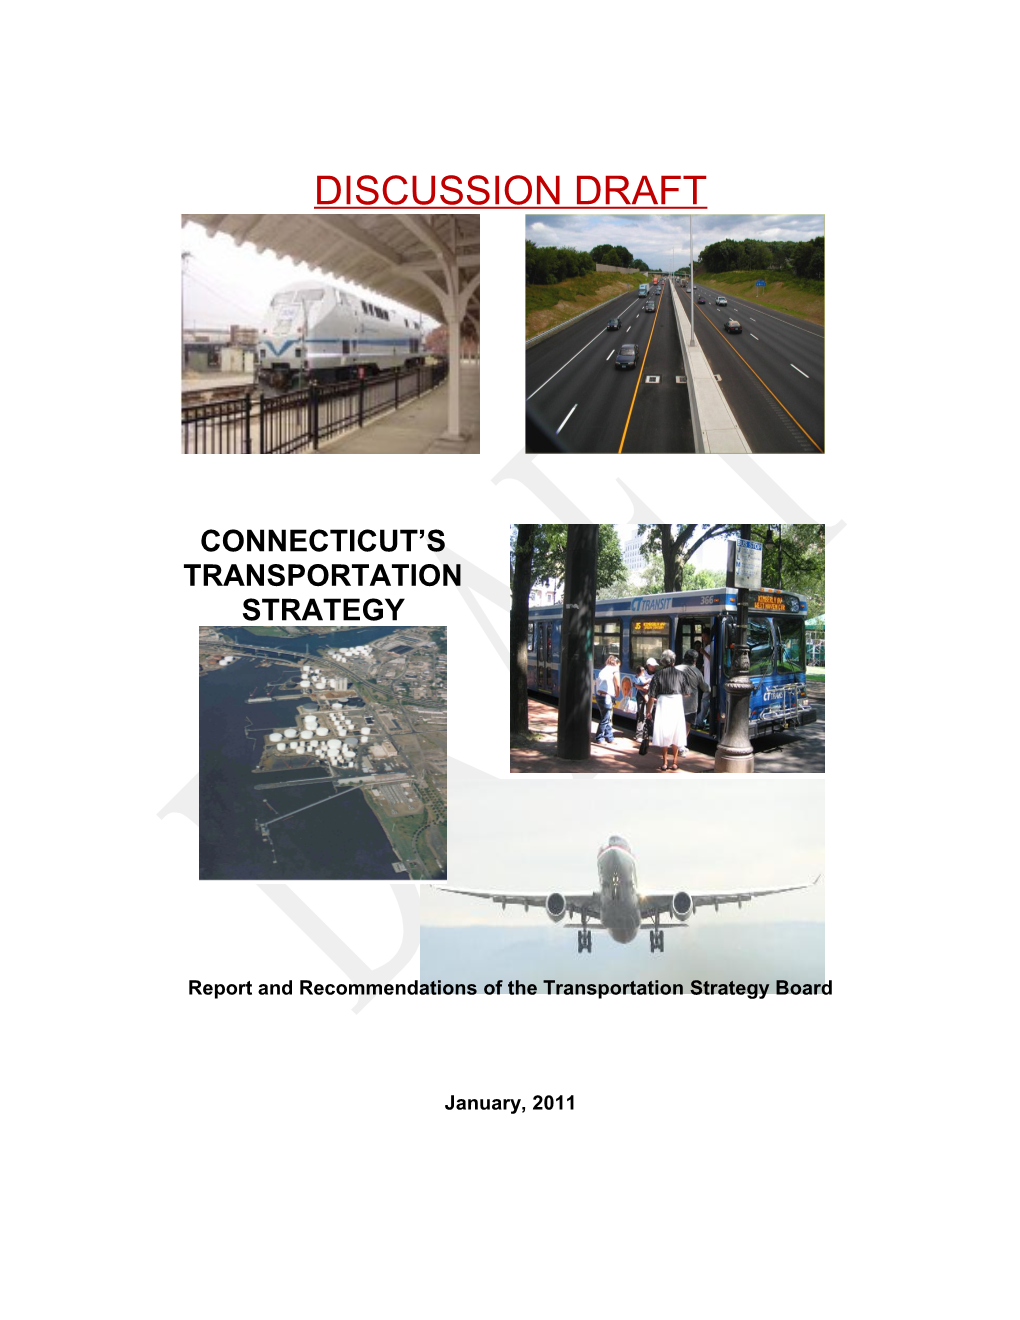 Report and Recommendations of the Transportation Strategy Board